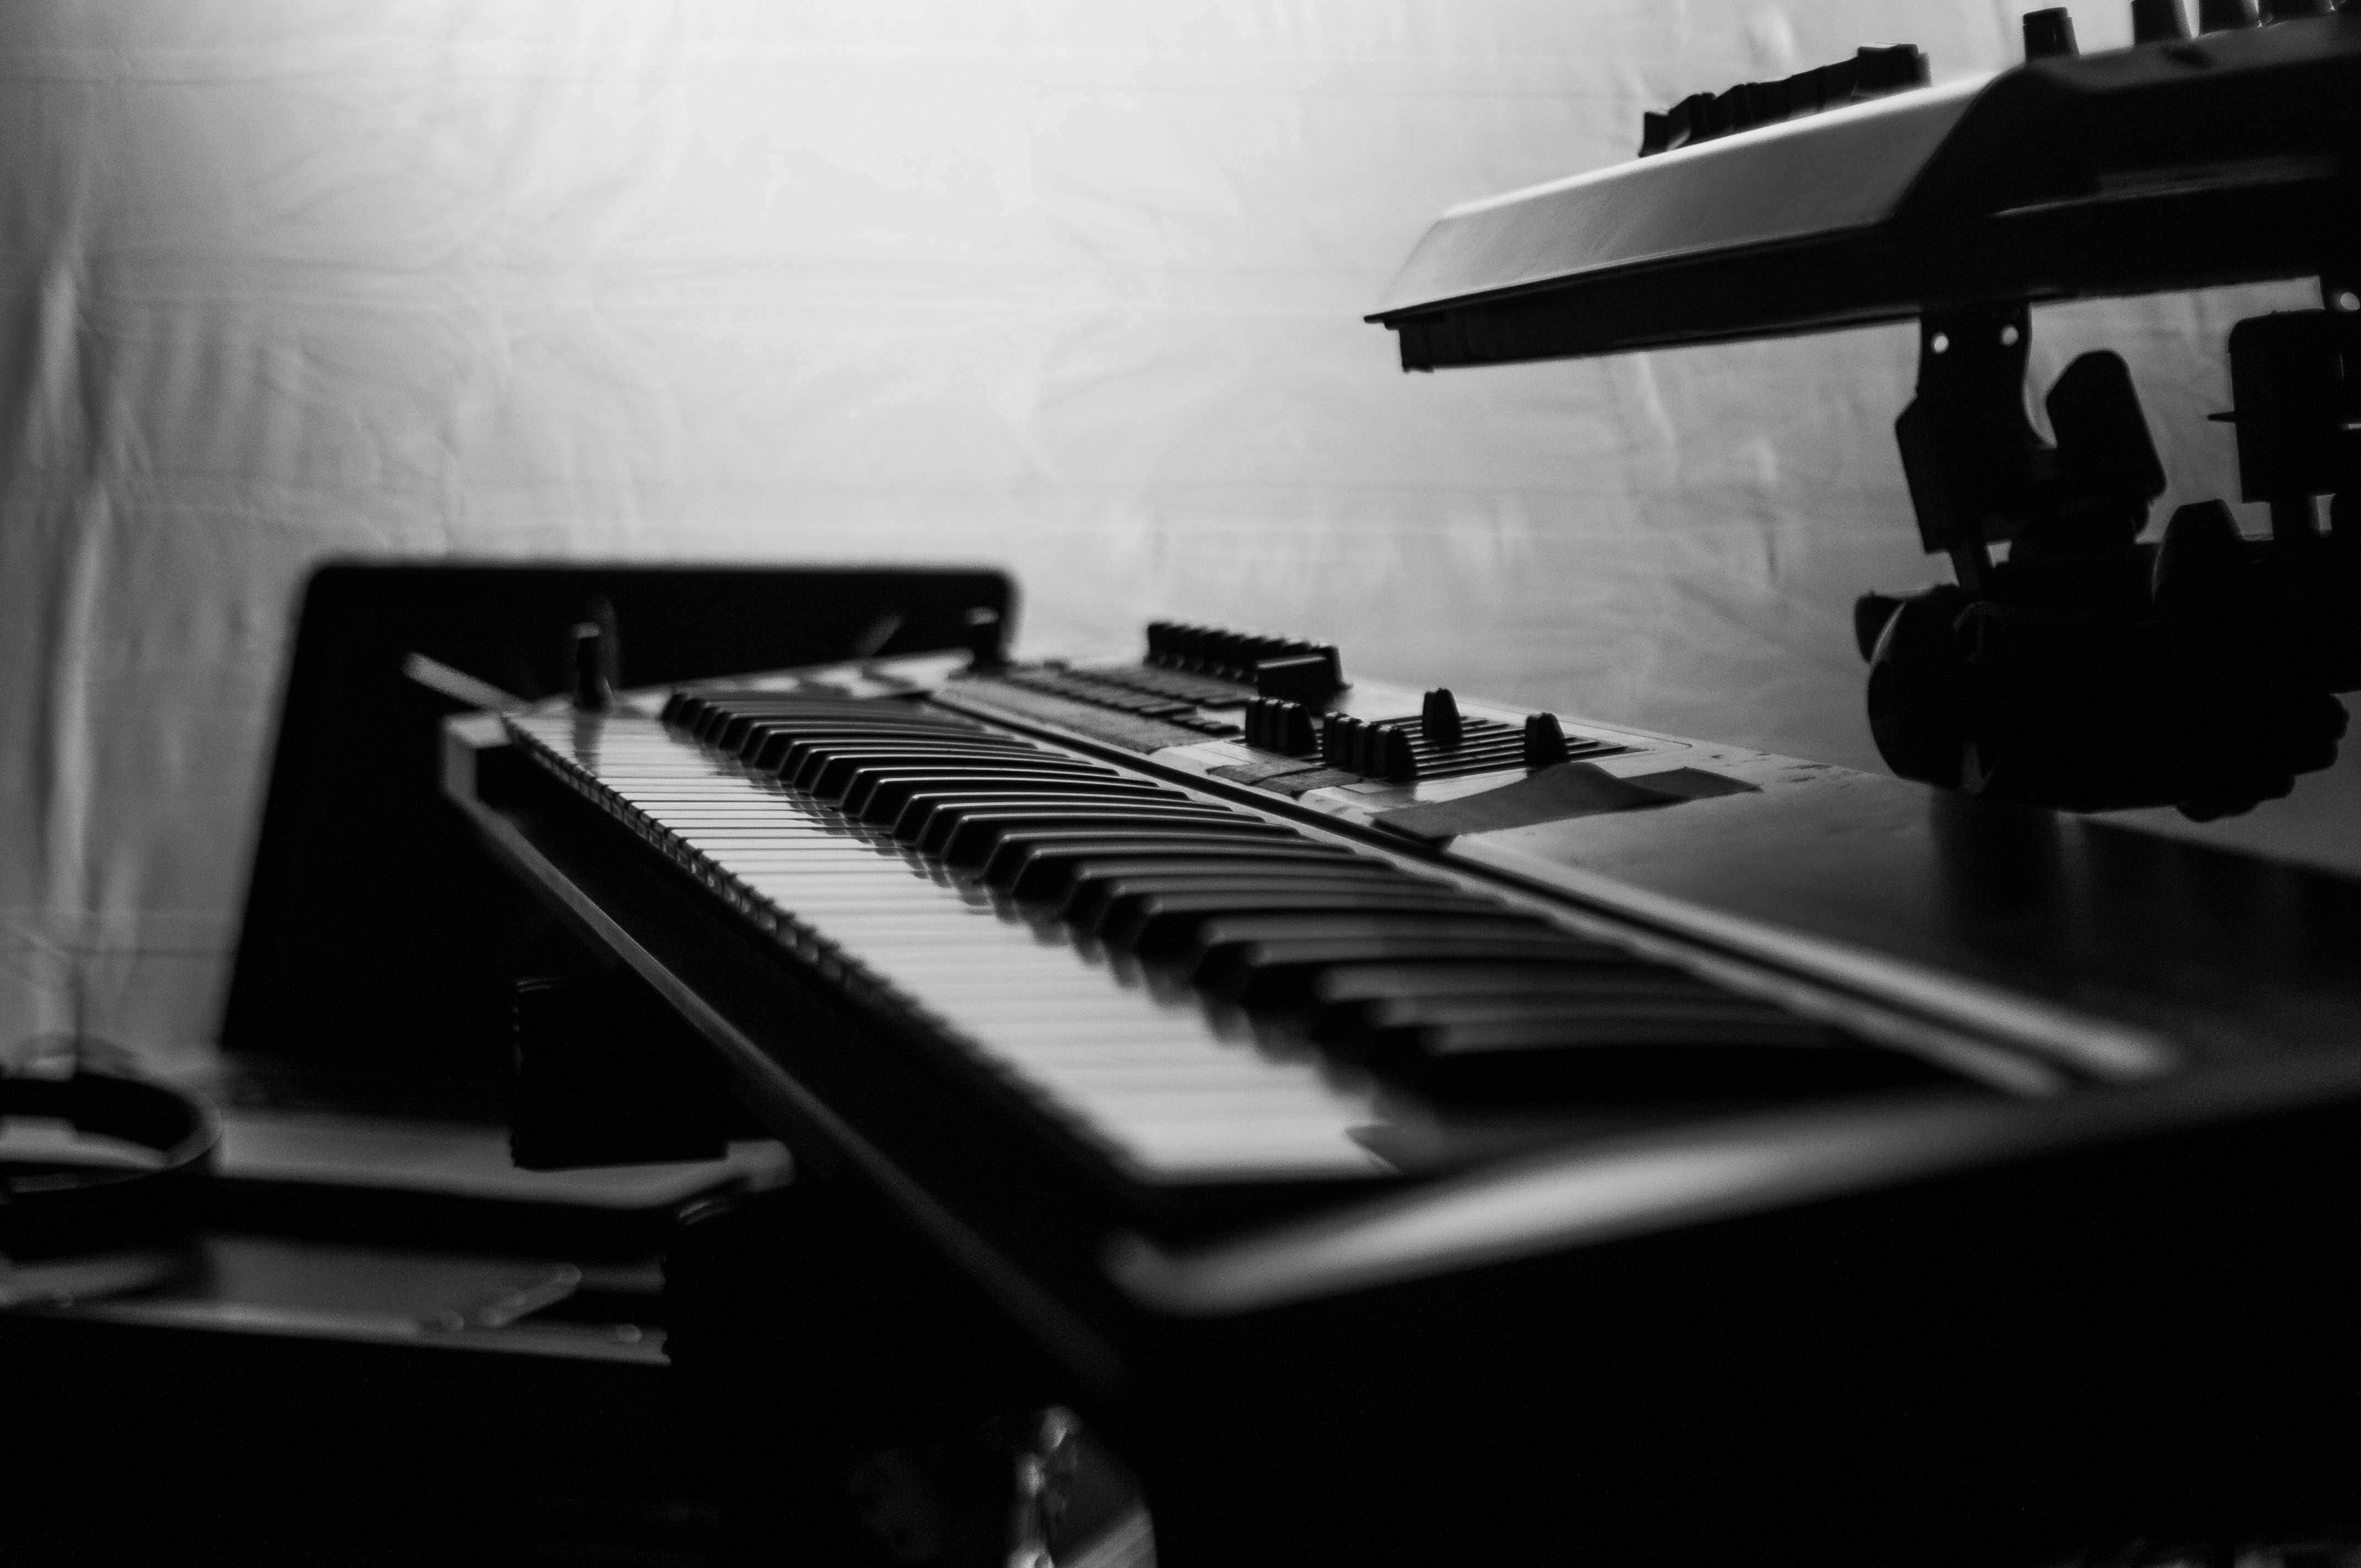 synthesizer near musical equipment in studio